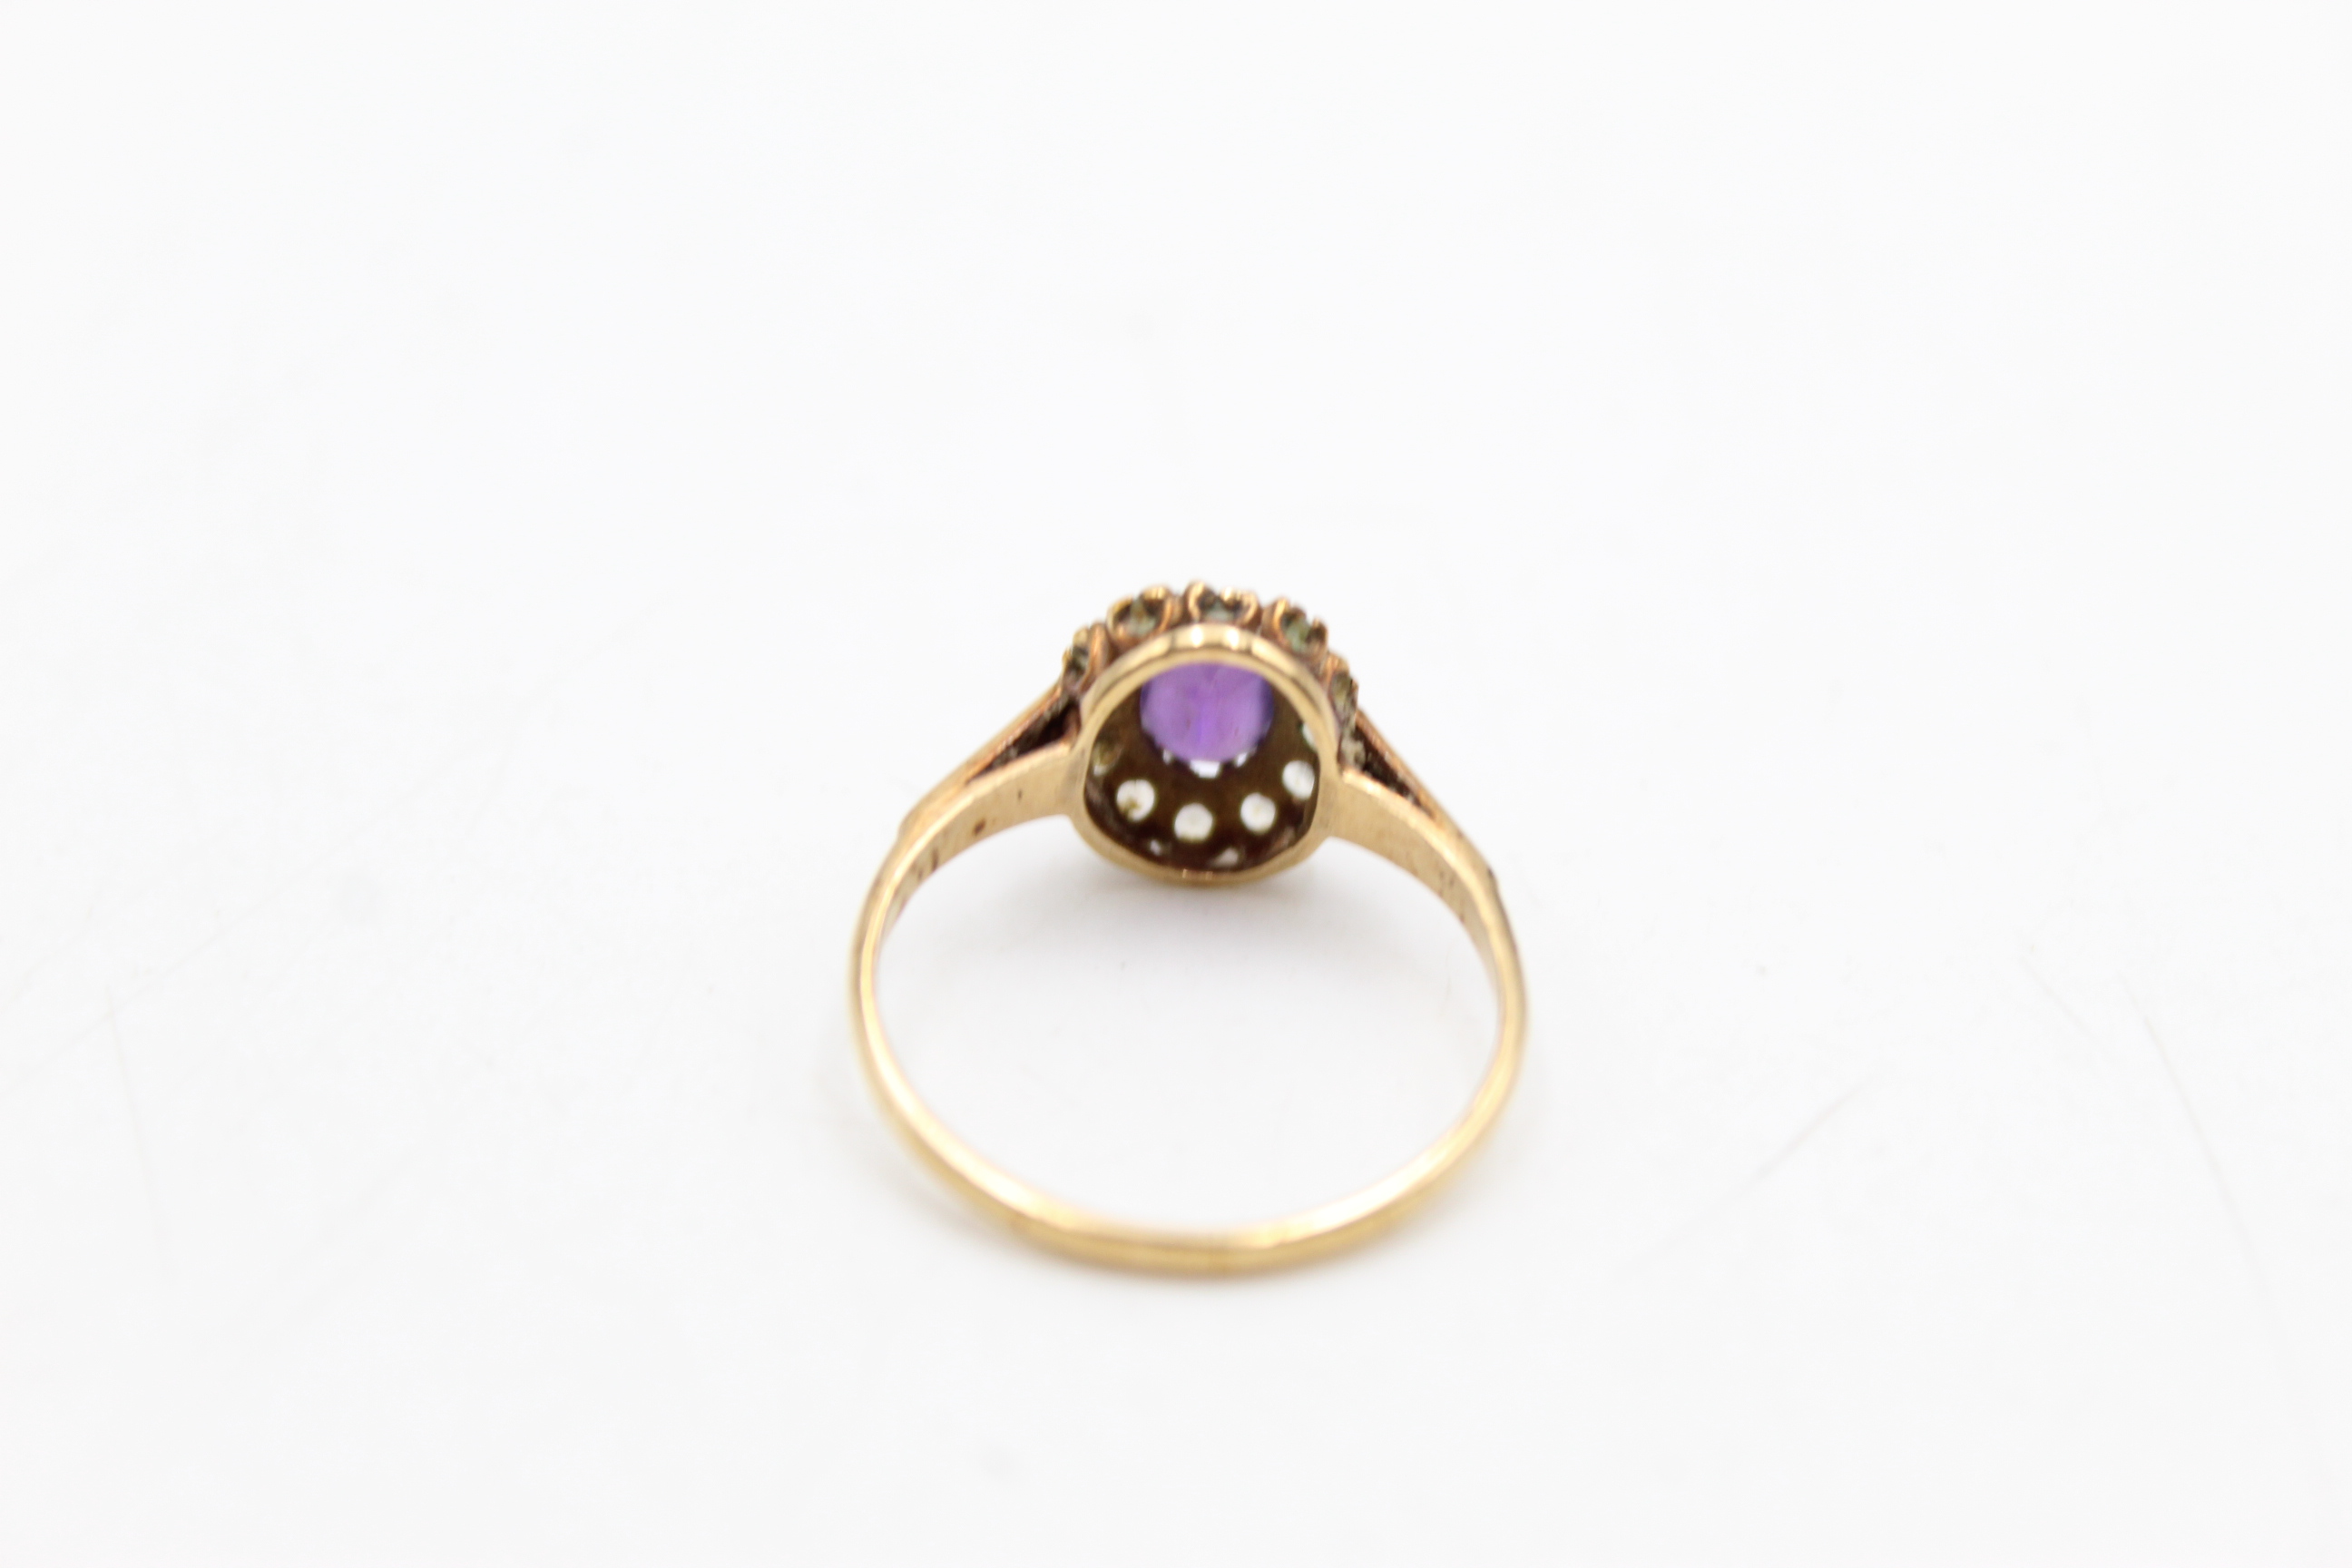 9ct gold amethyst & clear gemstone halo dress ring (2.1g) - Image 6 of 7